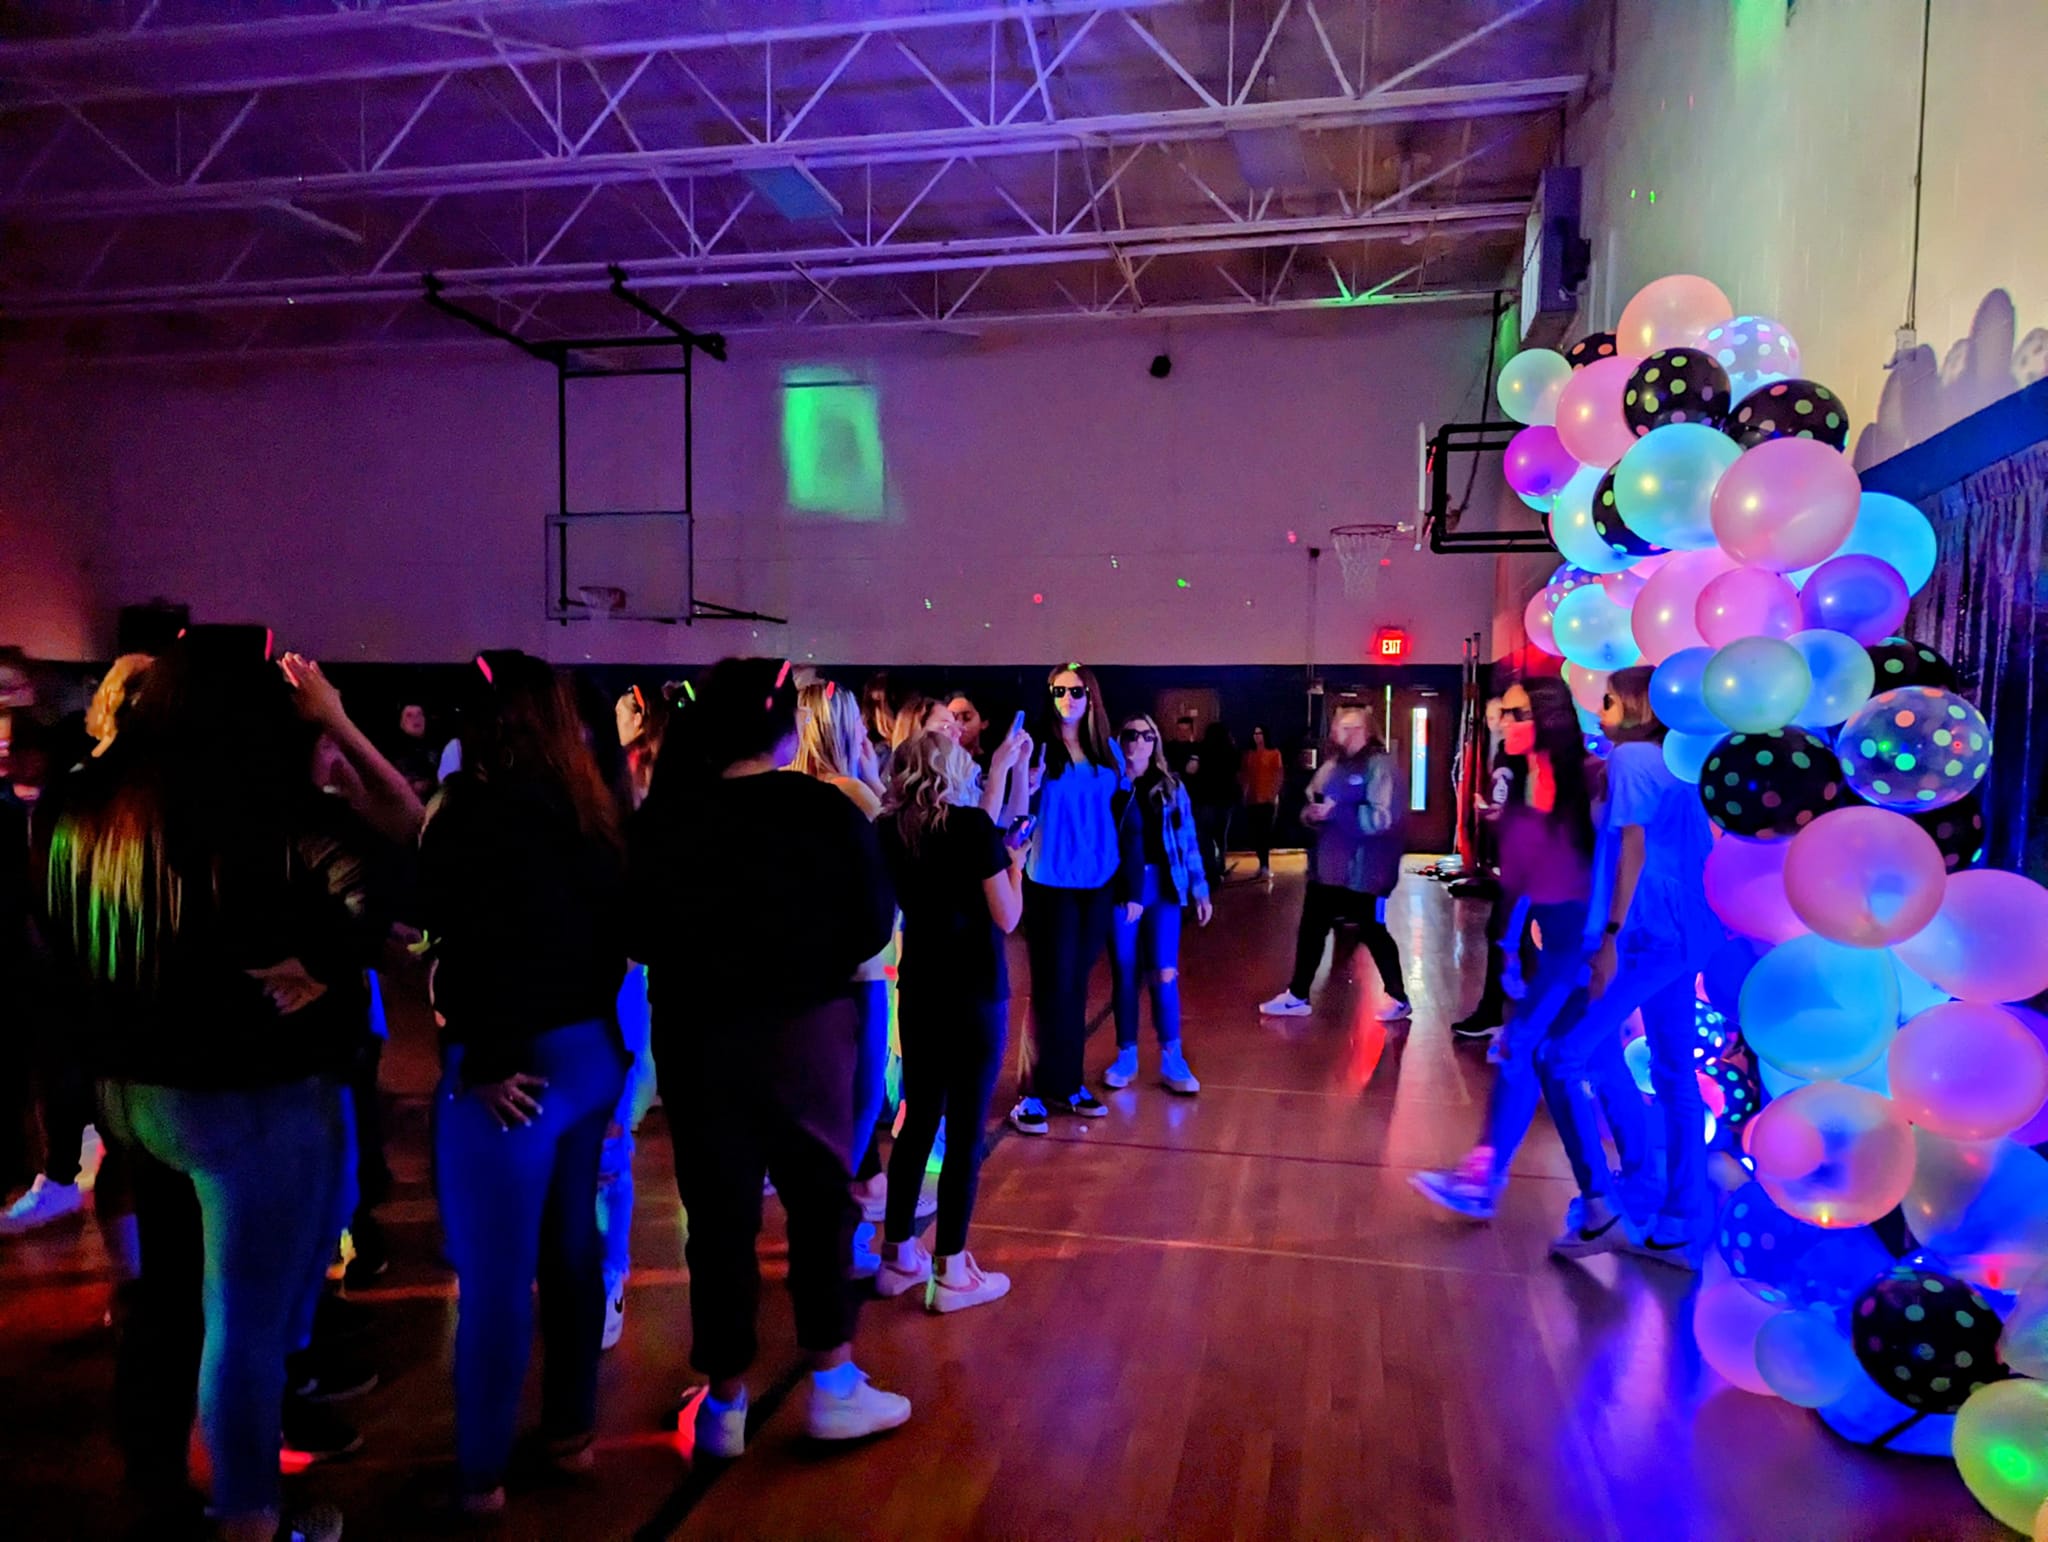 Neon lights in gym with people dancing